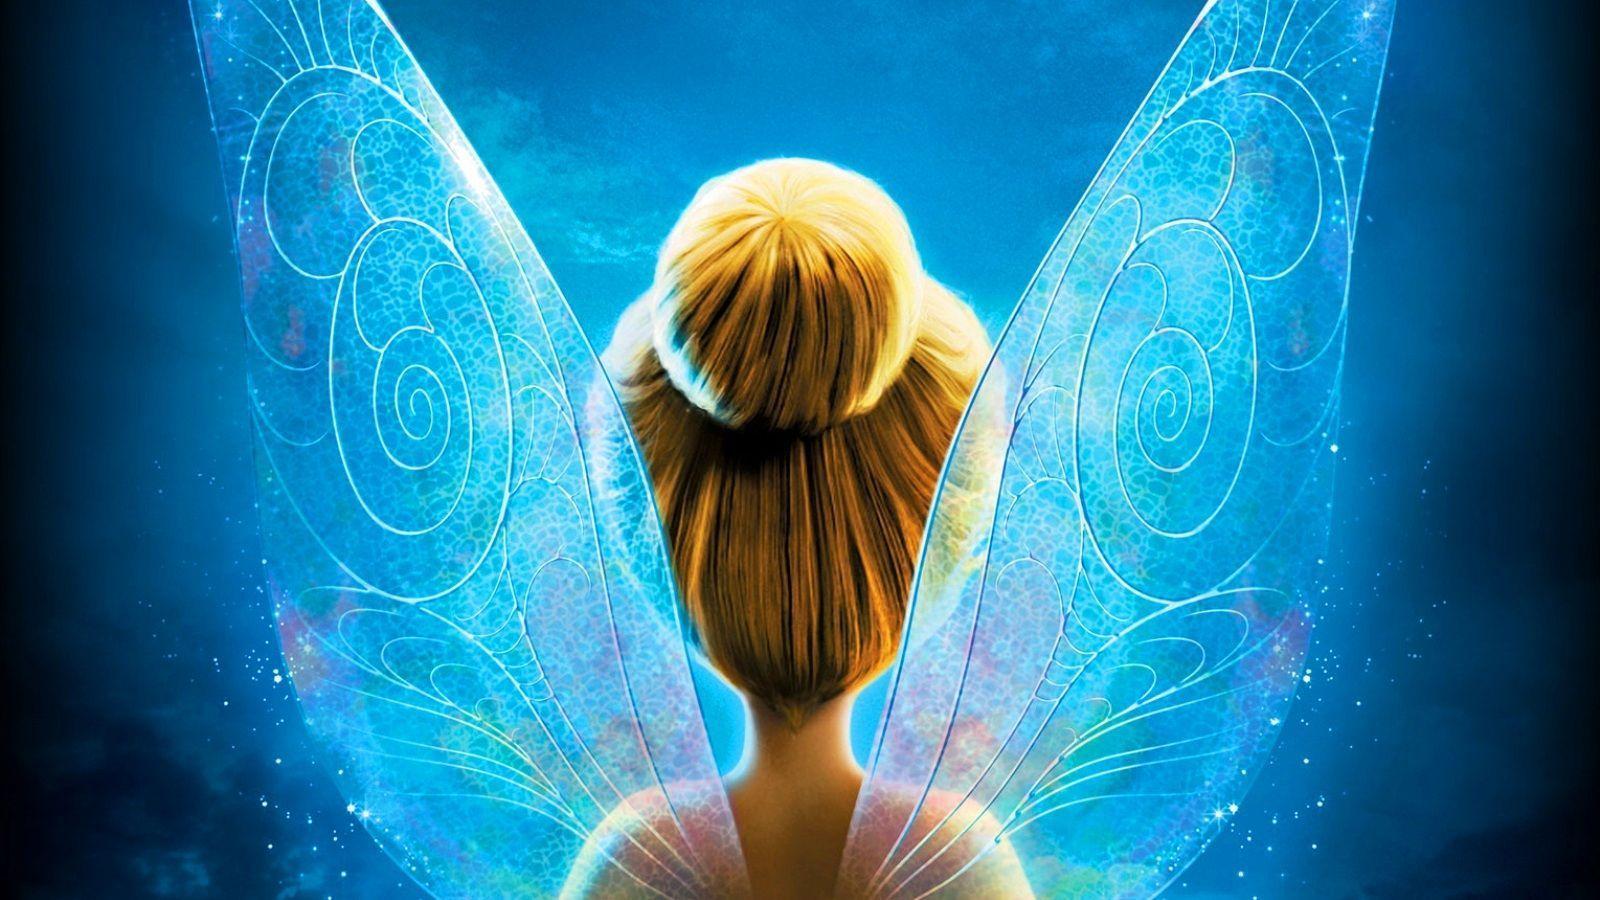 Tinkerbell & the Mysterious Winter Woods Wallpaper For iPhone